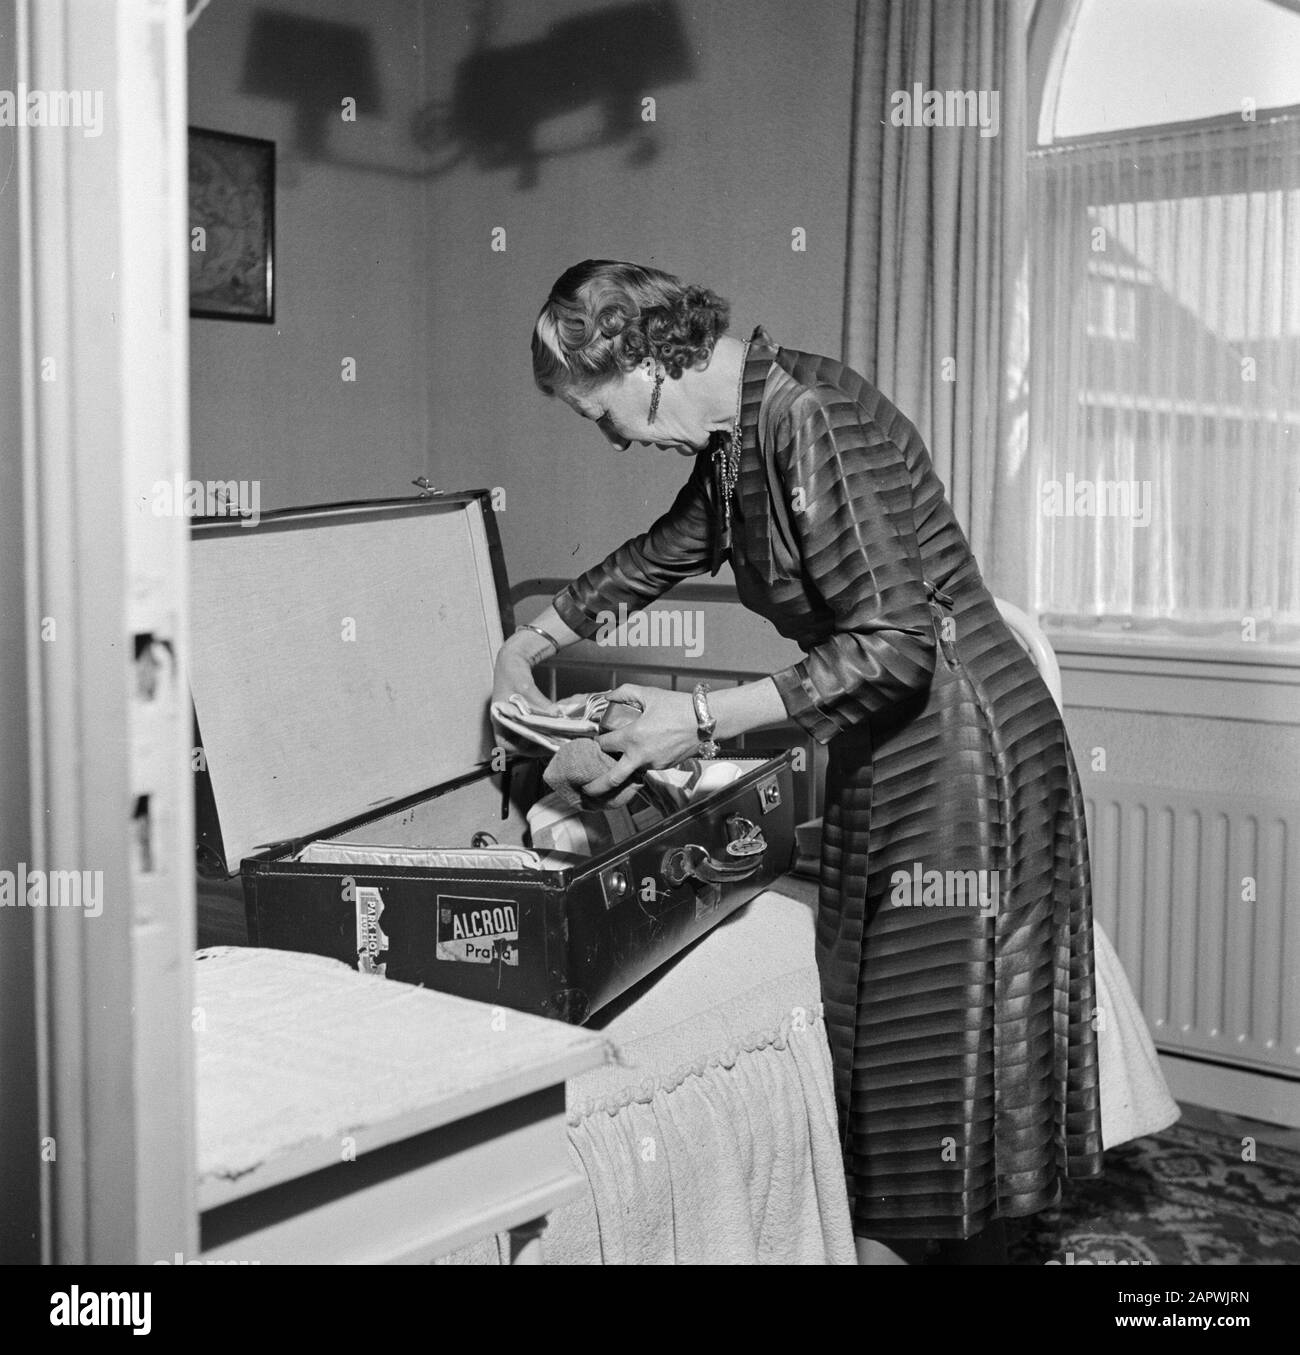 KLM, Buildings, offices, organization  Mrs Dellaert at home when packing a suitcase Annotation: Mr Dellaert (1893-1960) was director of the KLM from 1950 to 1960 Date: May 1954 Location: Amstelveen, Noord-Holland Keywords: packing, interior, suitcases, homes Stock Photo